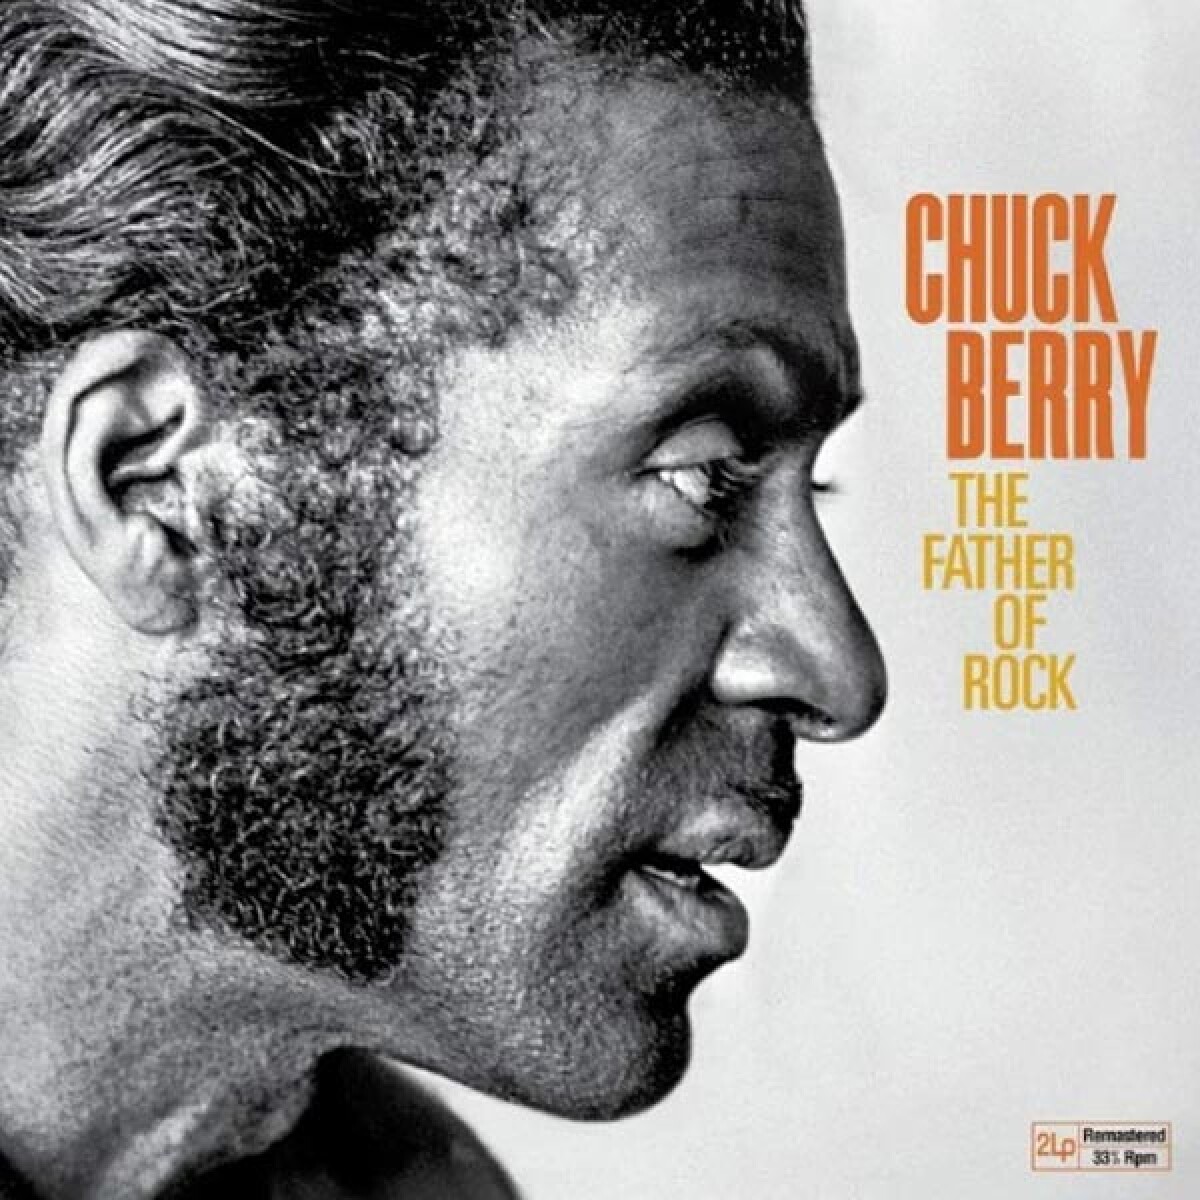 Chuck Berry - The Father Of Rock - Vinilo 